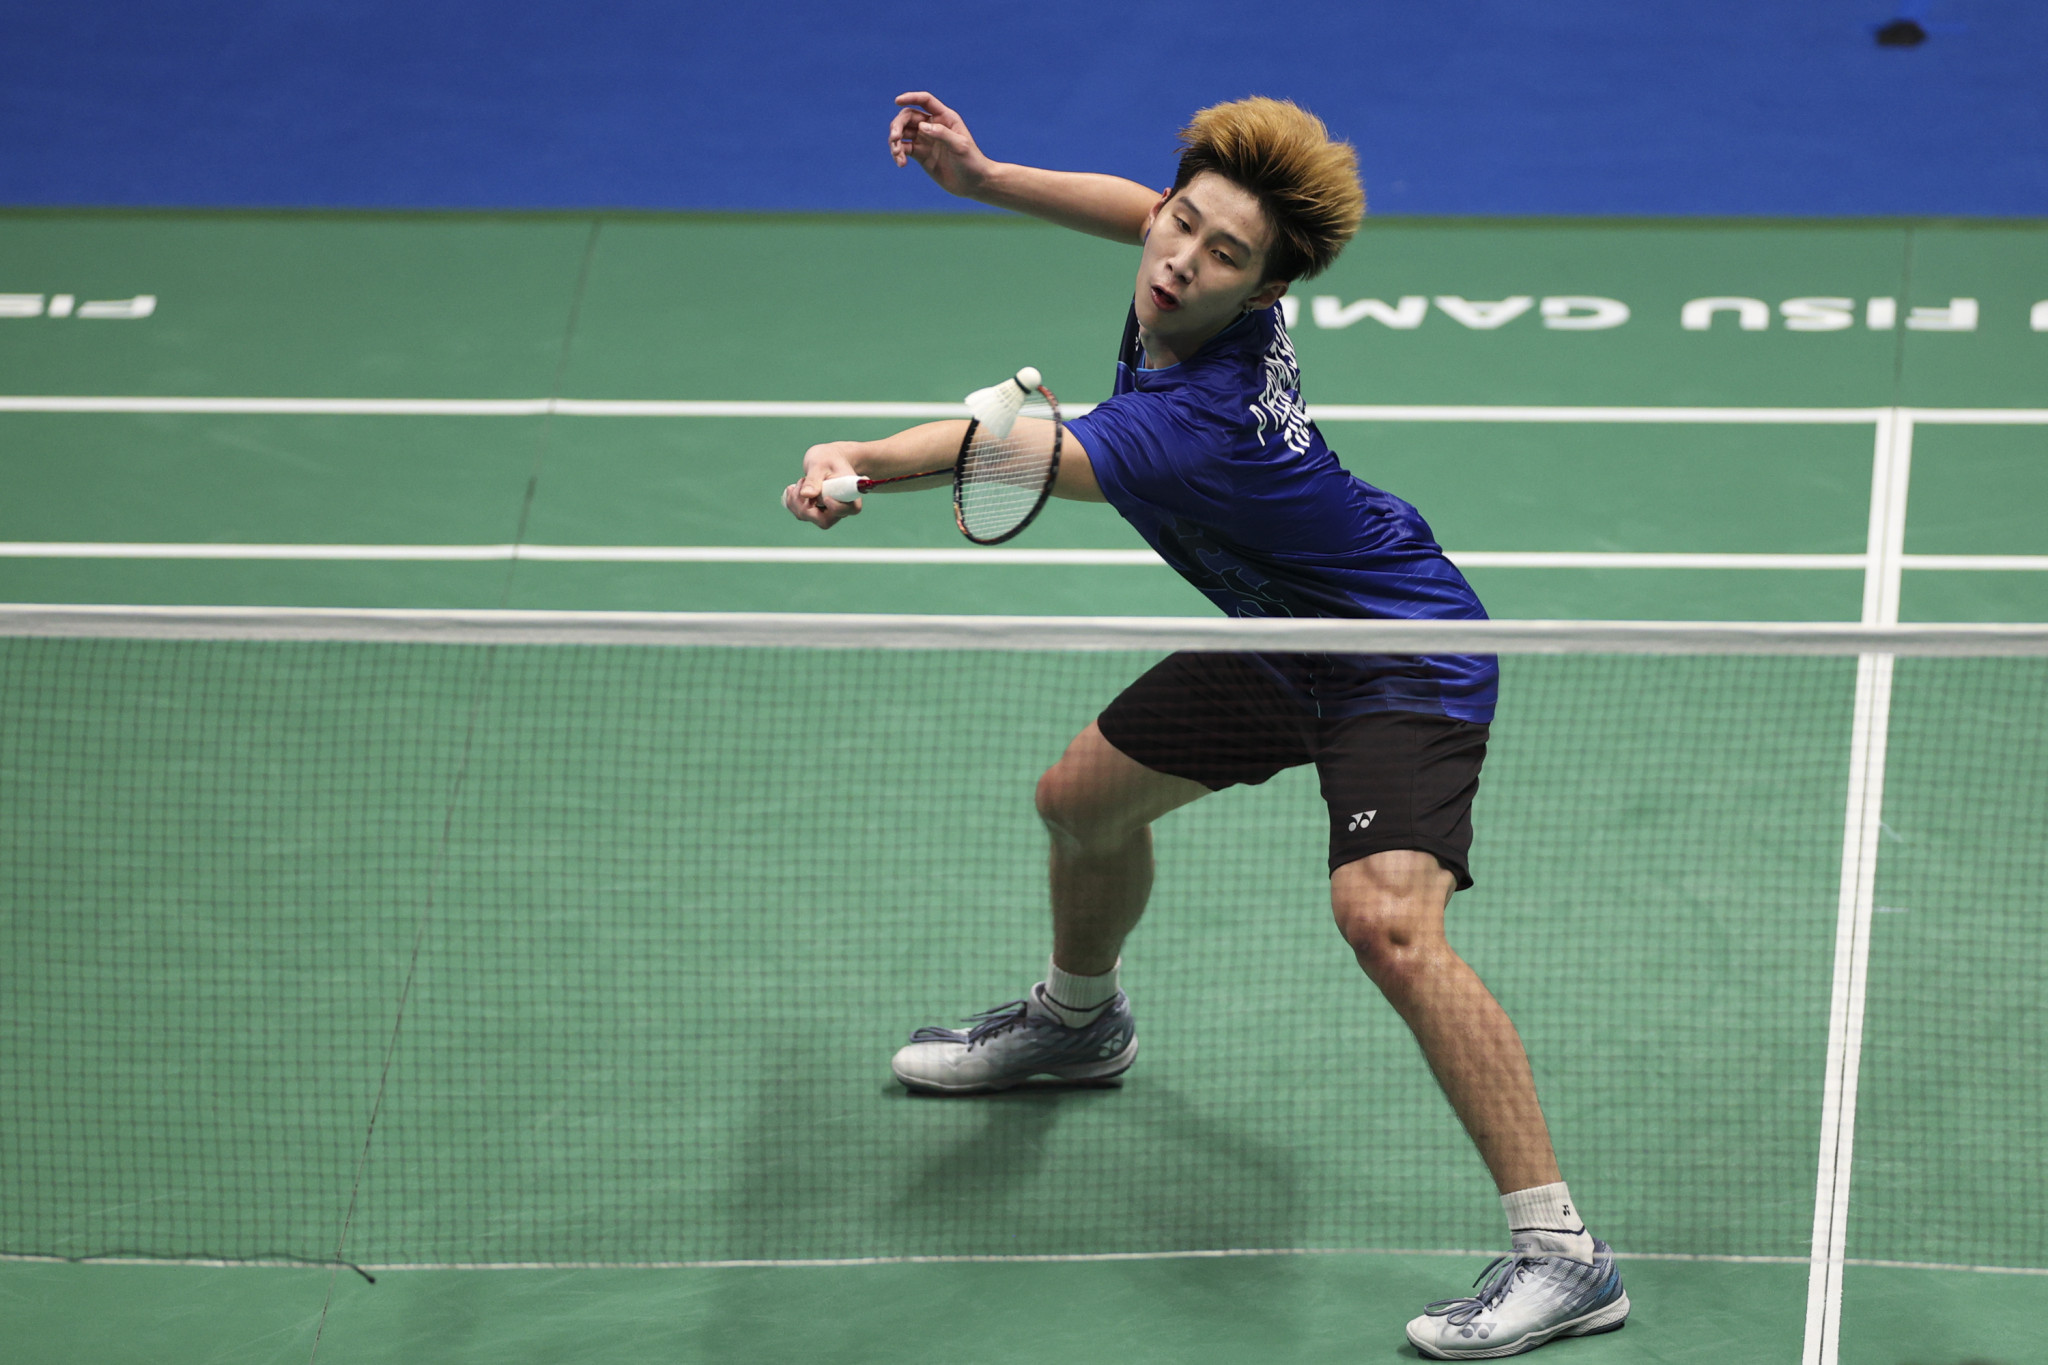 Panitchapon Teeraratsakul of Thailand had the chance to end the Chinese domination as he went up against Wang Zhengxin in the men's singles final ©Chengdu 2021